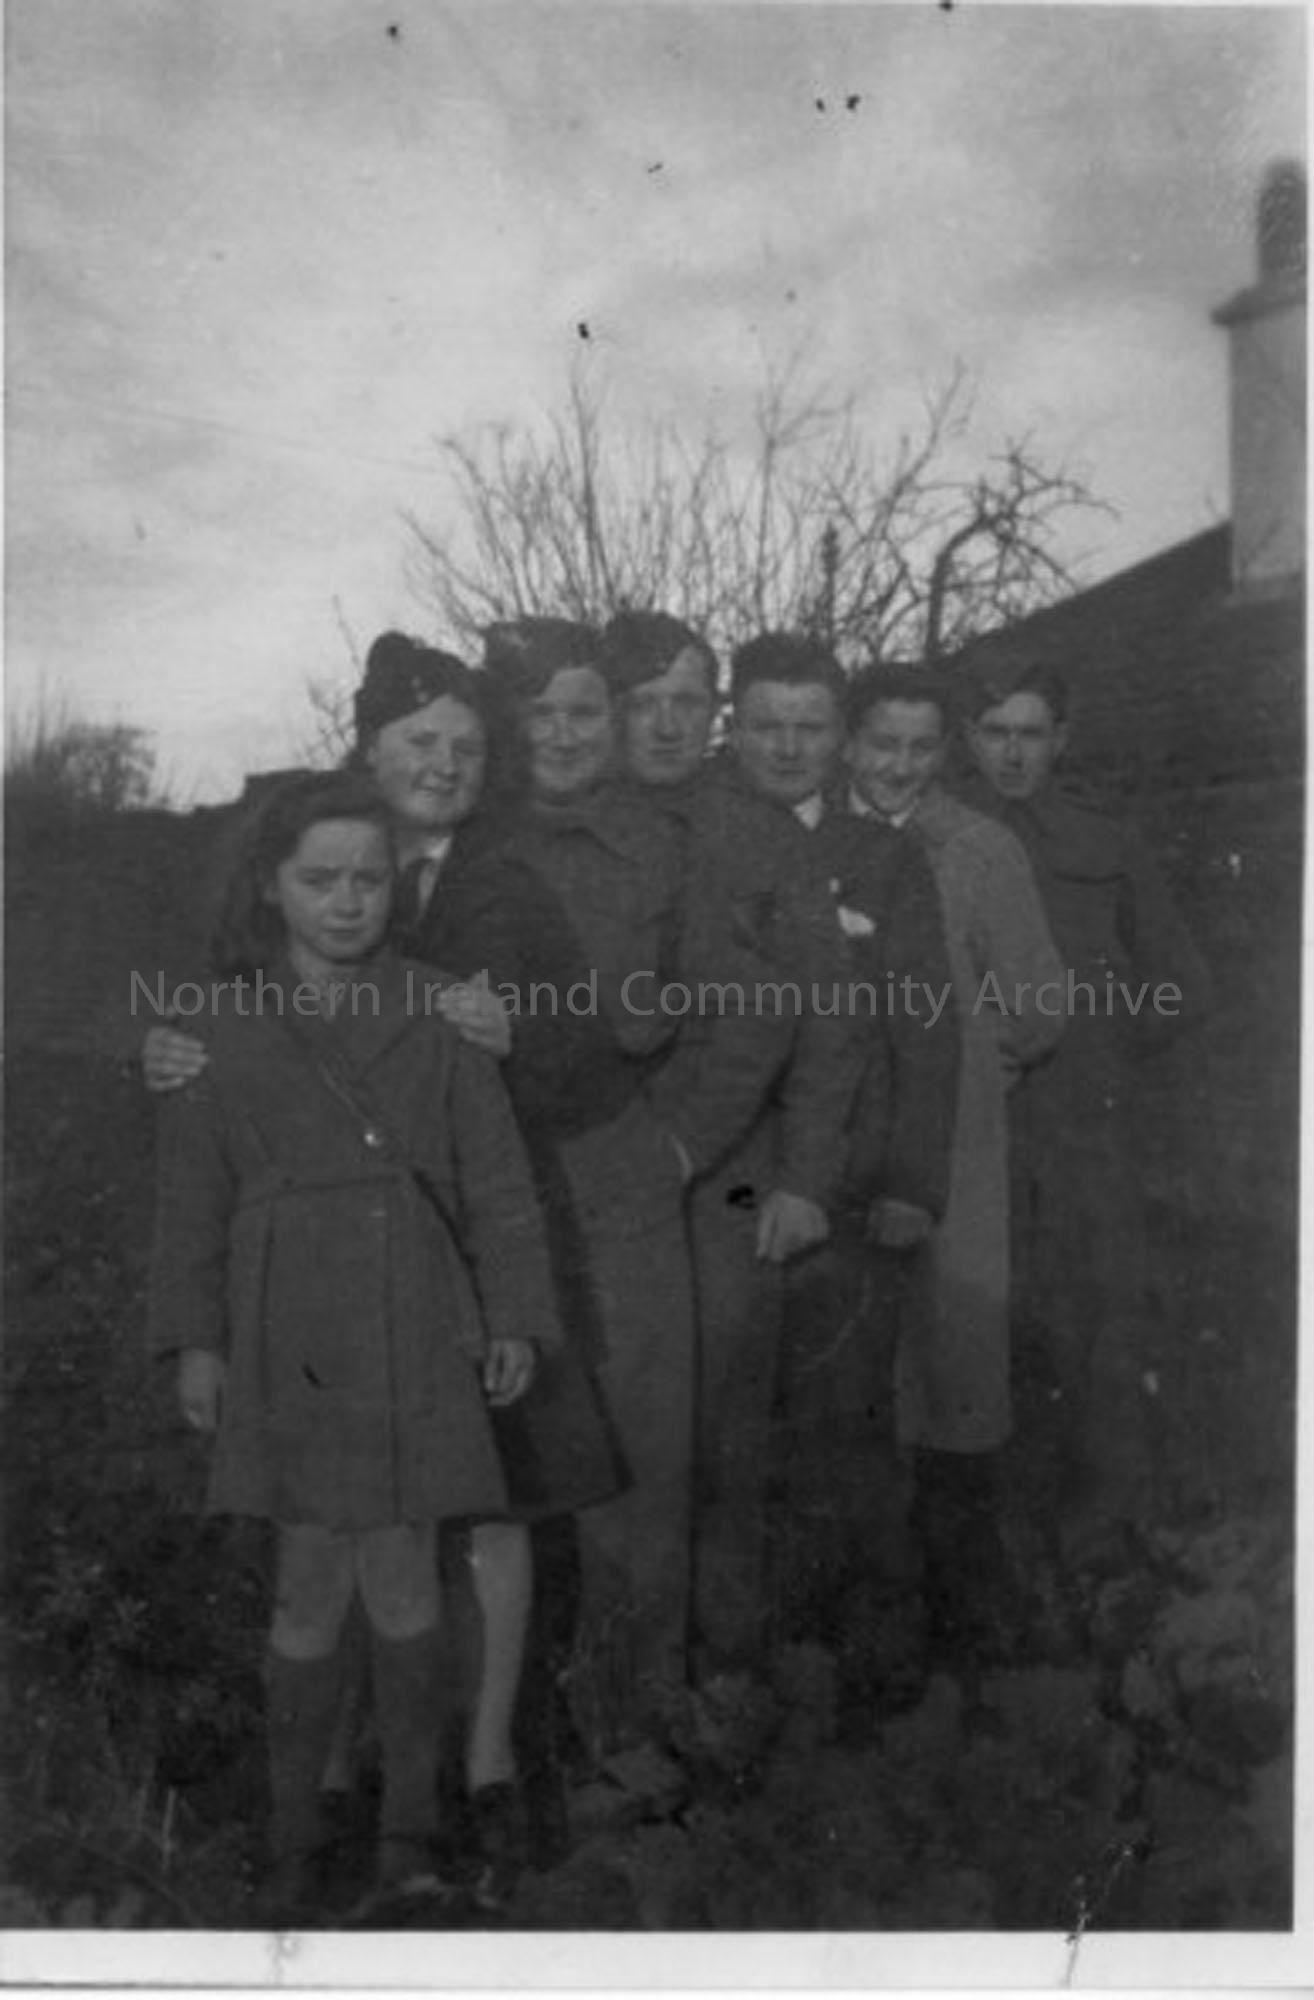 Black and white photograph of Fred Dunlop (donor) with family in garden 57? Charlotte Street, Ballymoney. c.1944-45